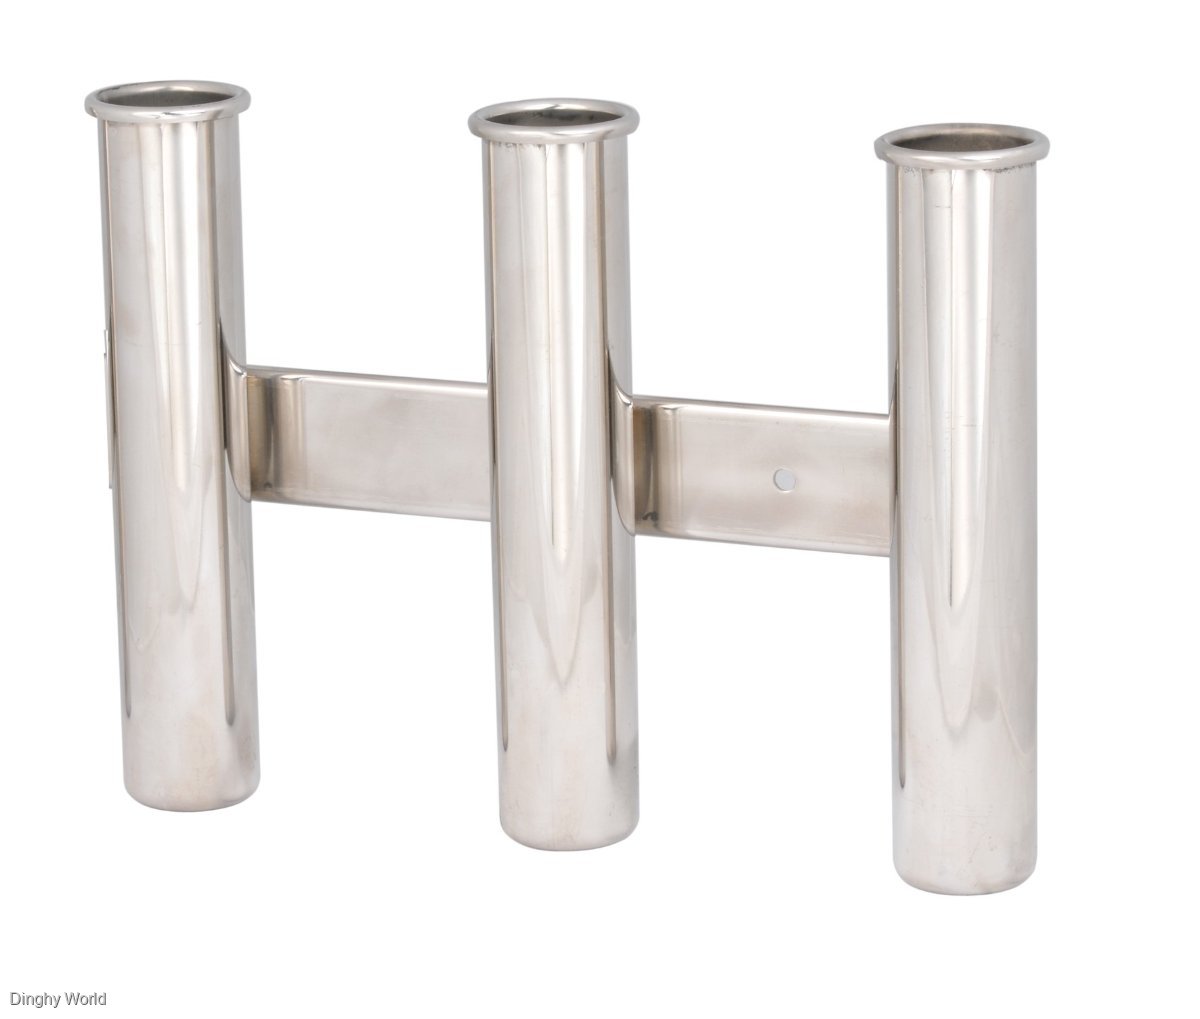 STAINLESS ROD HOLDERS - 3 AND 4 HOLDER TYPE - GREAT VALUE- $ 40 AND $ 55